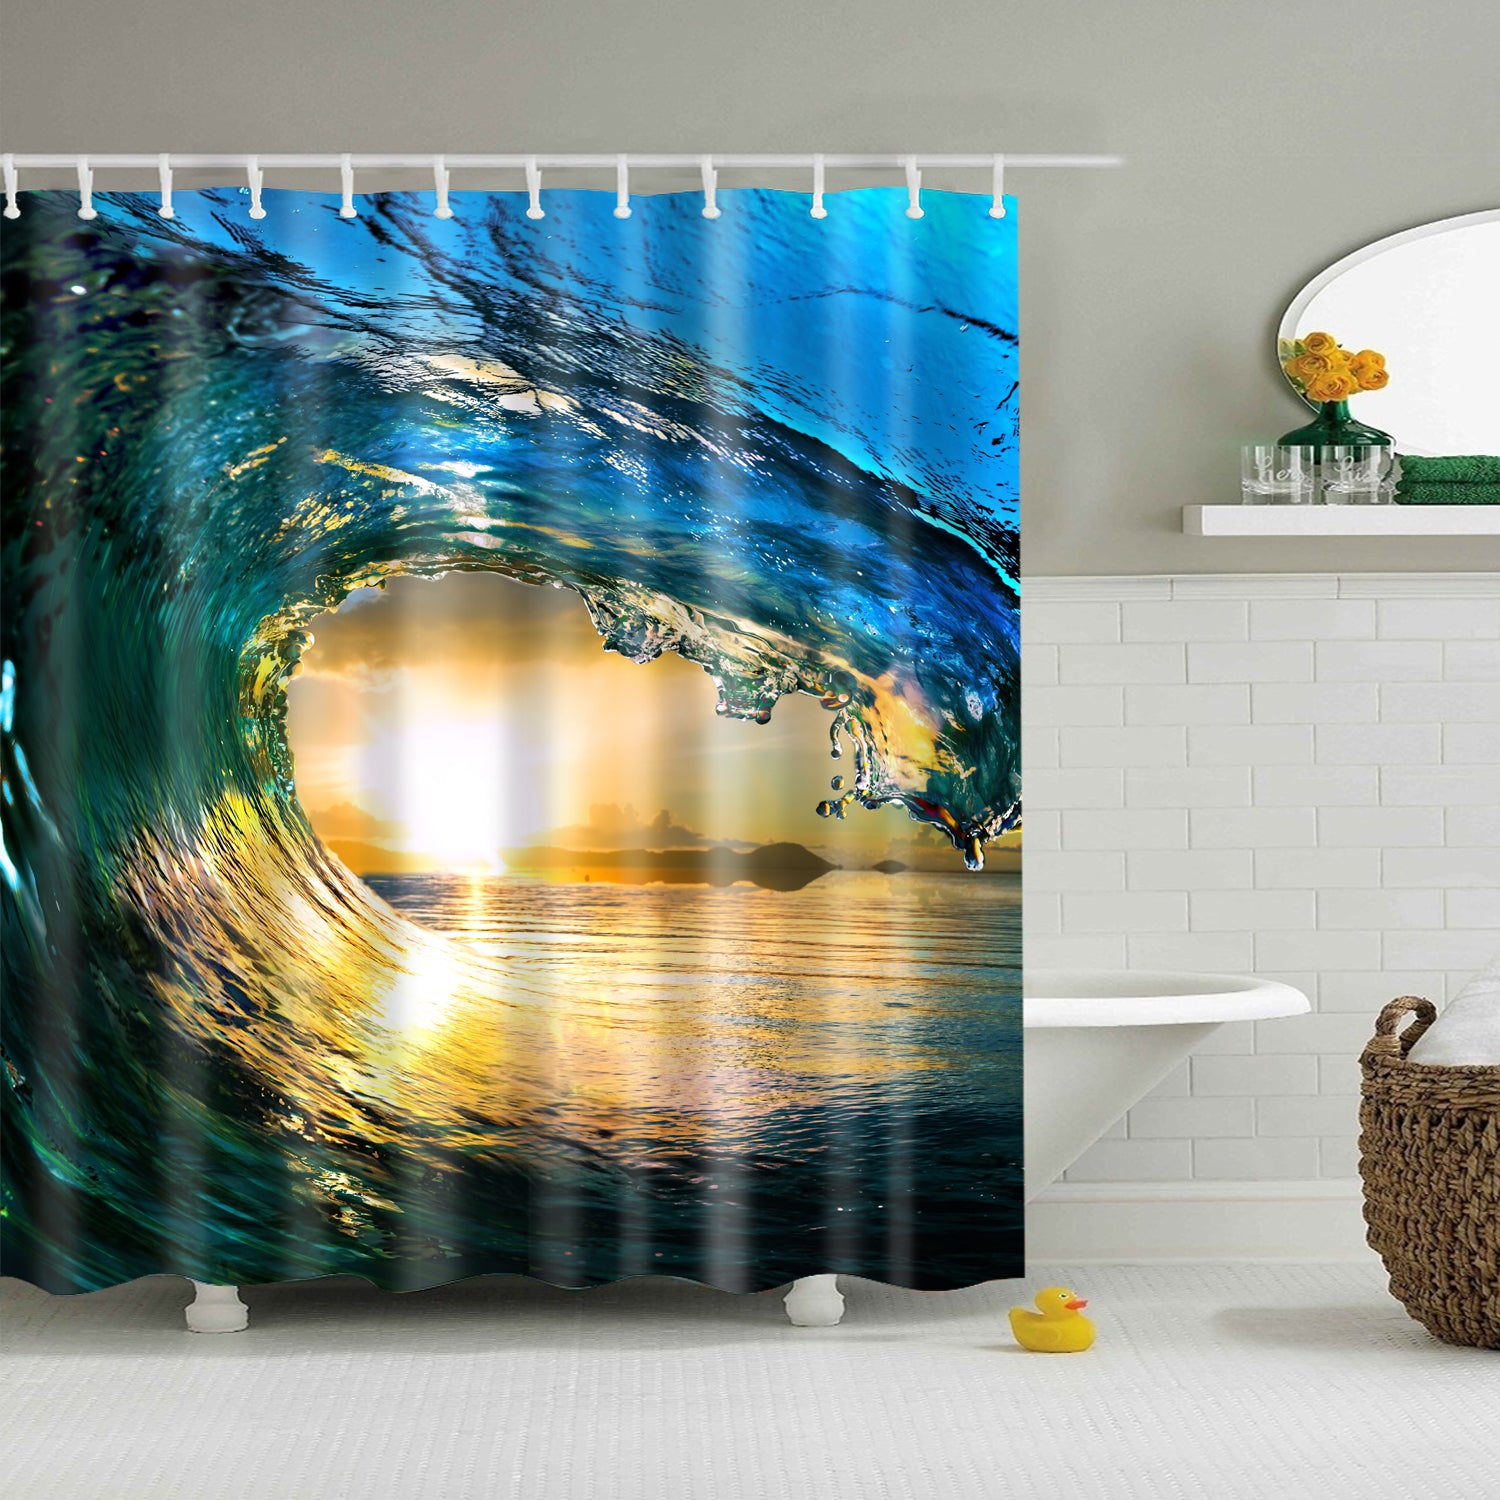 Inside The Stunning Waves Shower Curtain